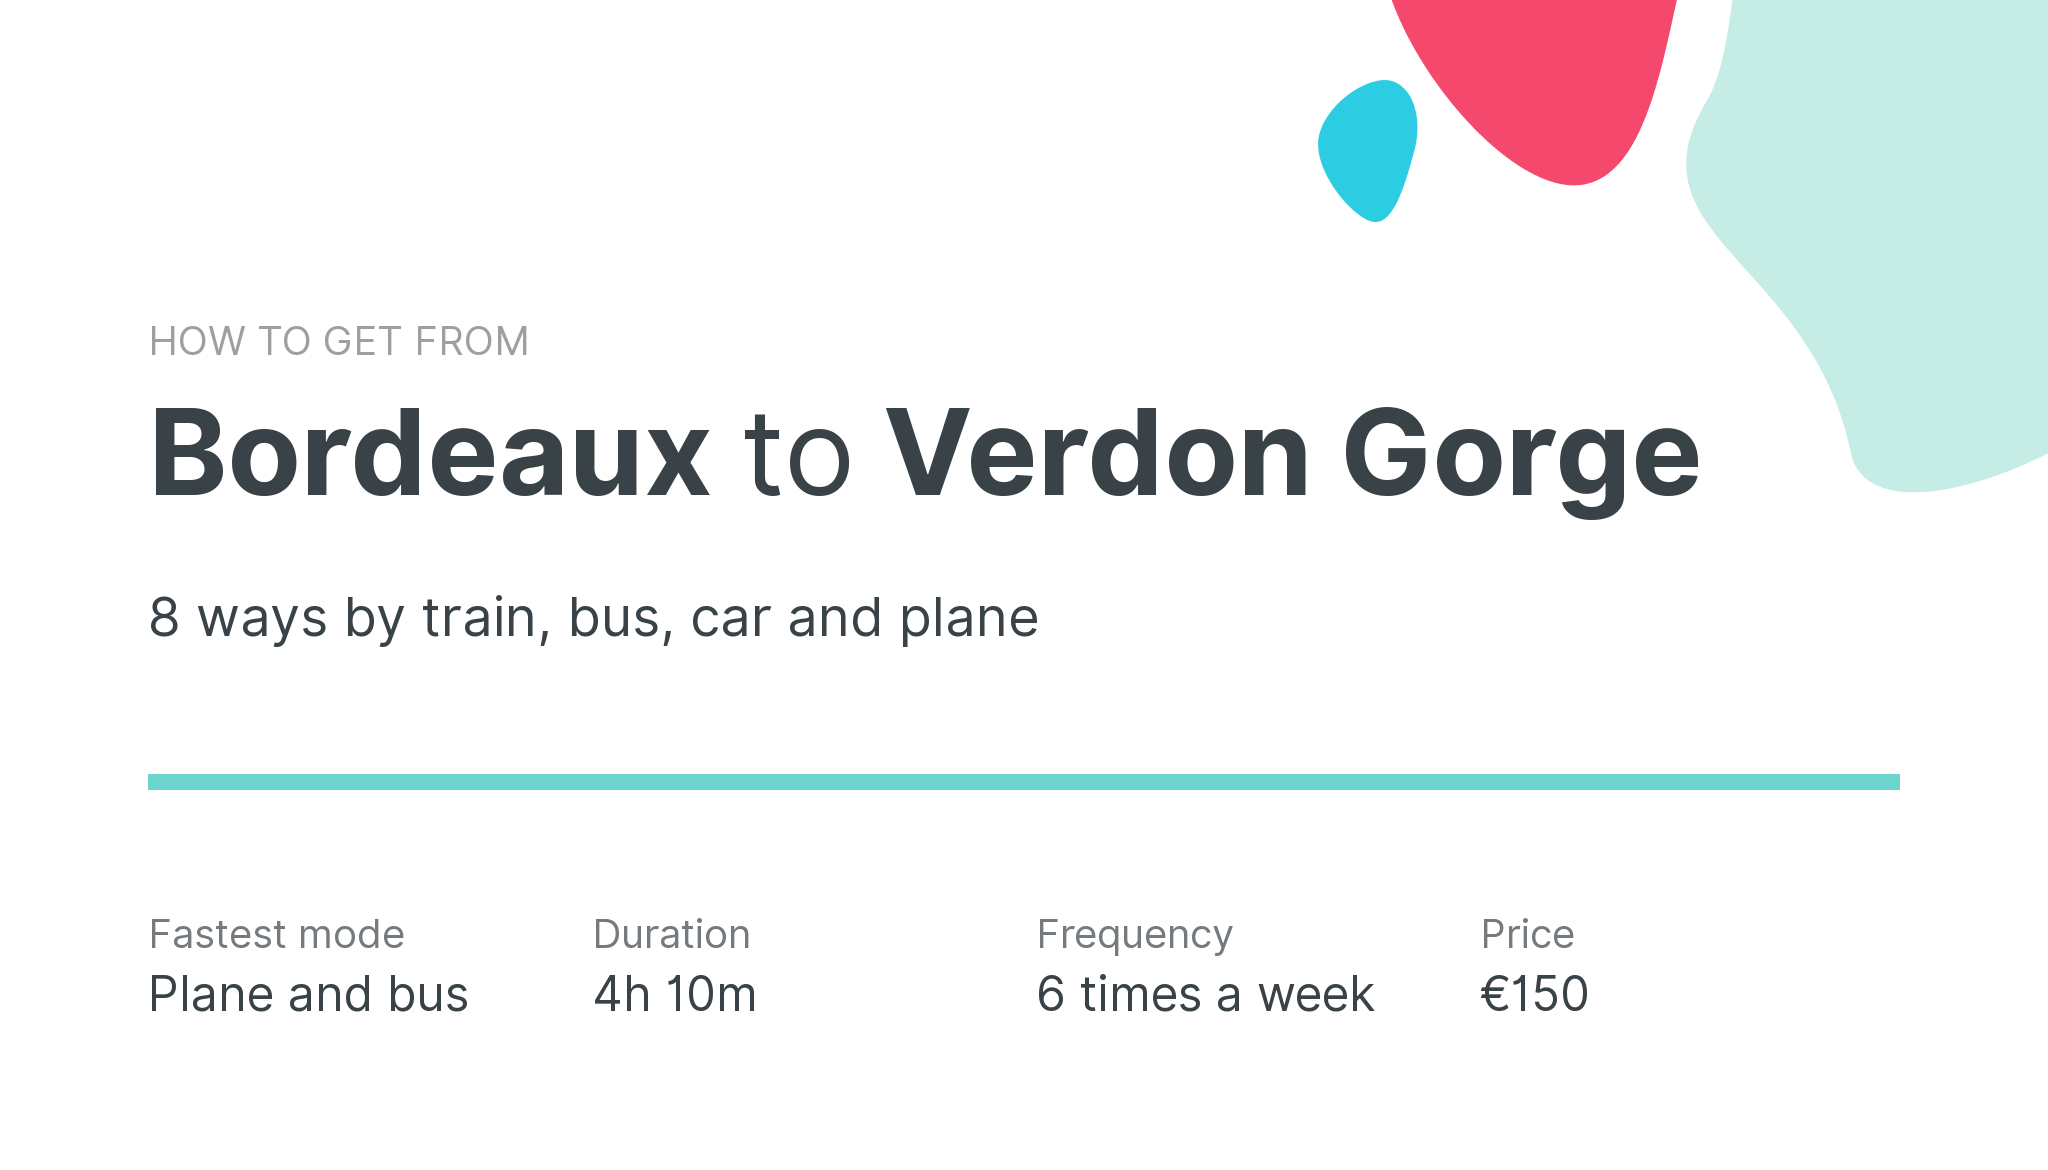 How do I get from Bordeaux to Verdon Gorge